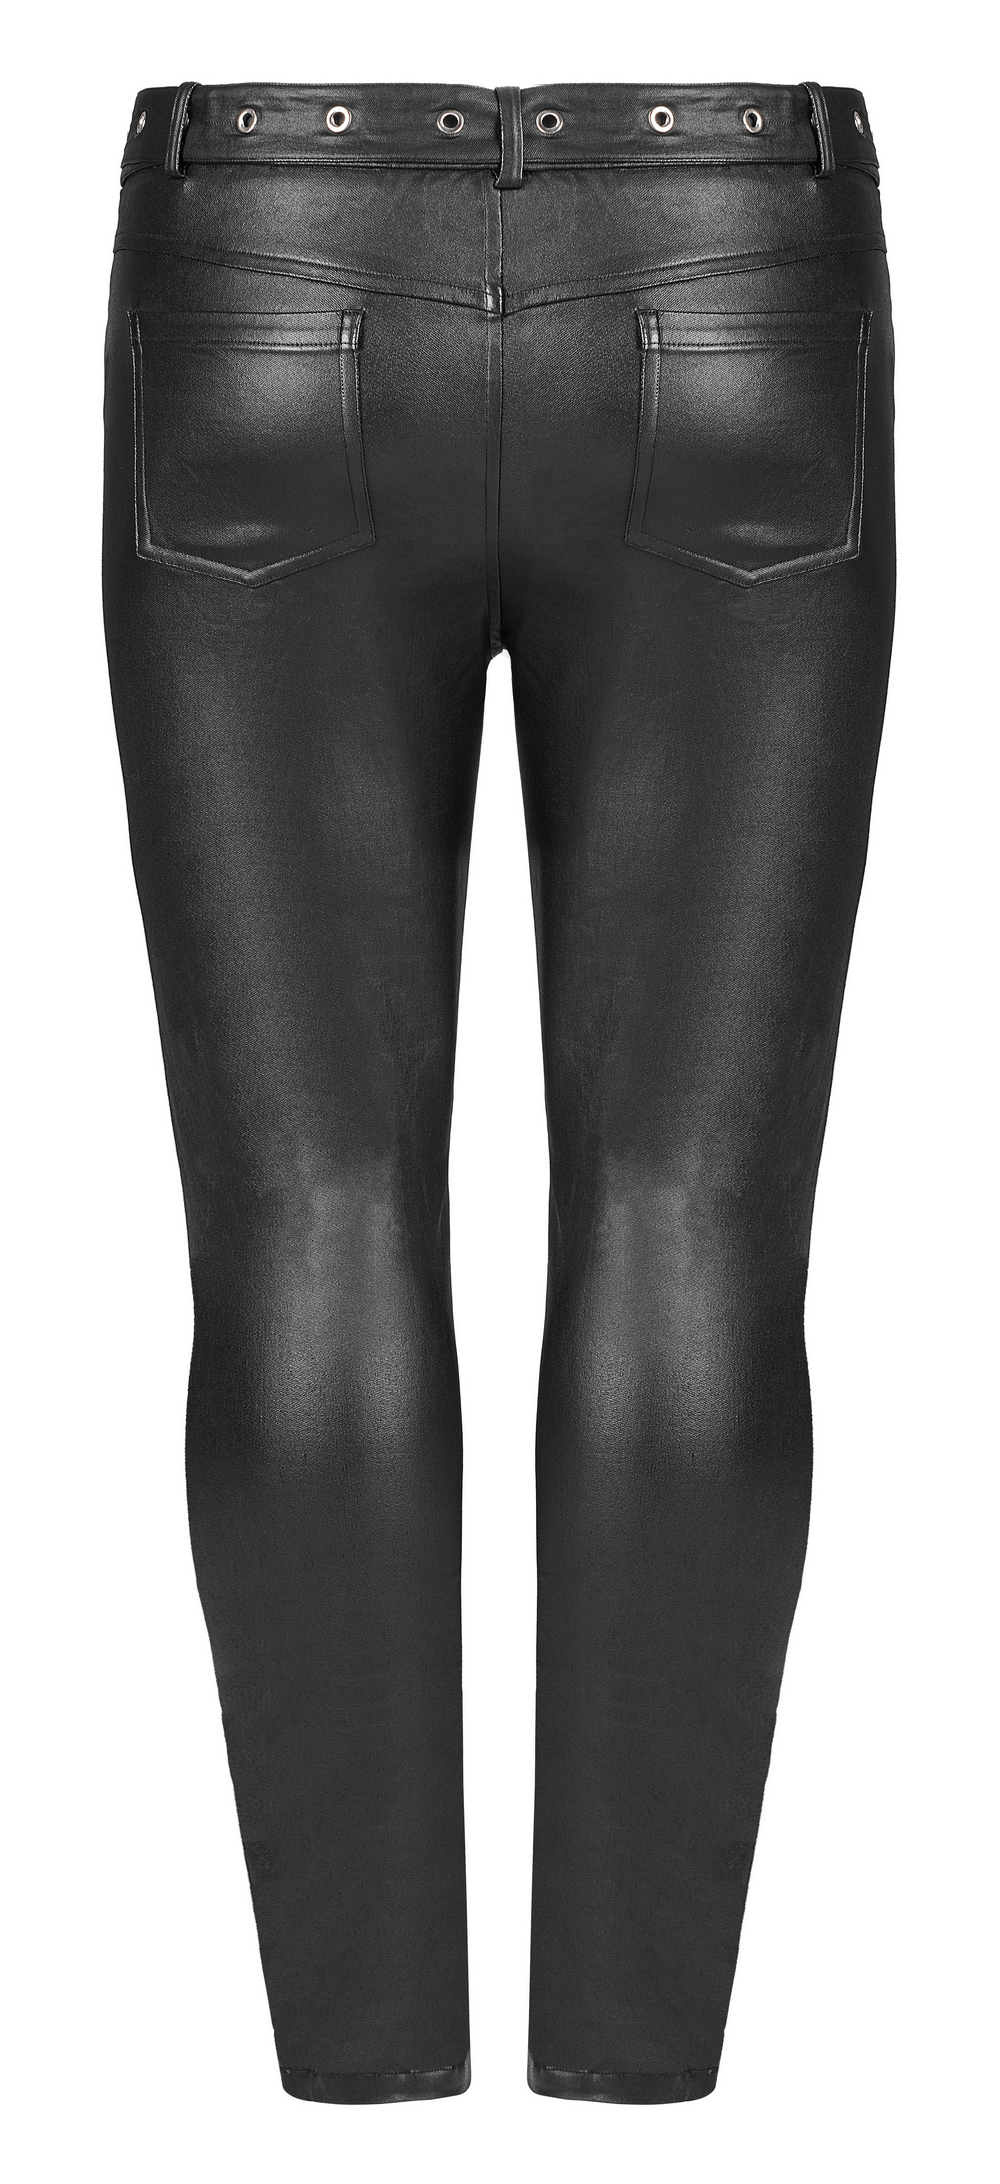 Chic Black Faux Leather Zippered Skinny Pants - HARD'N'HEAVY